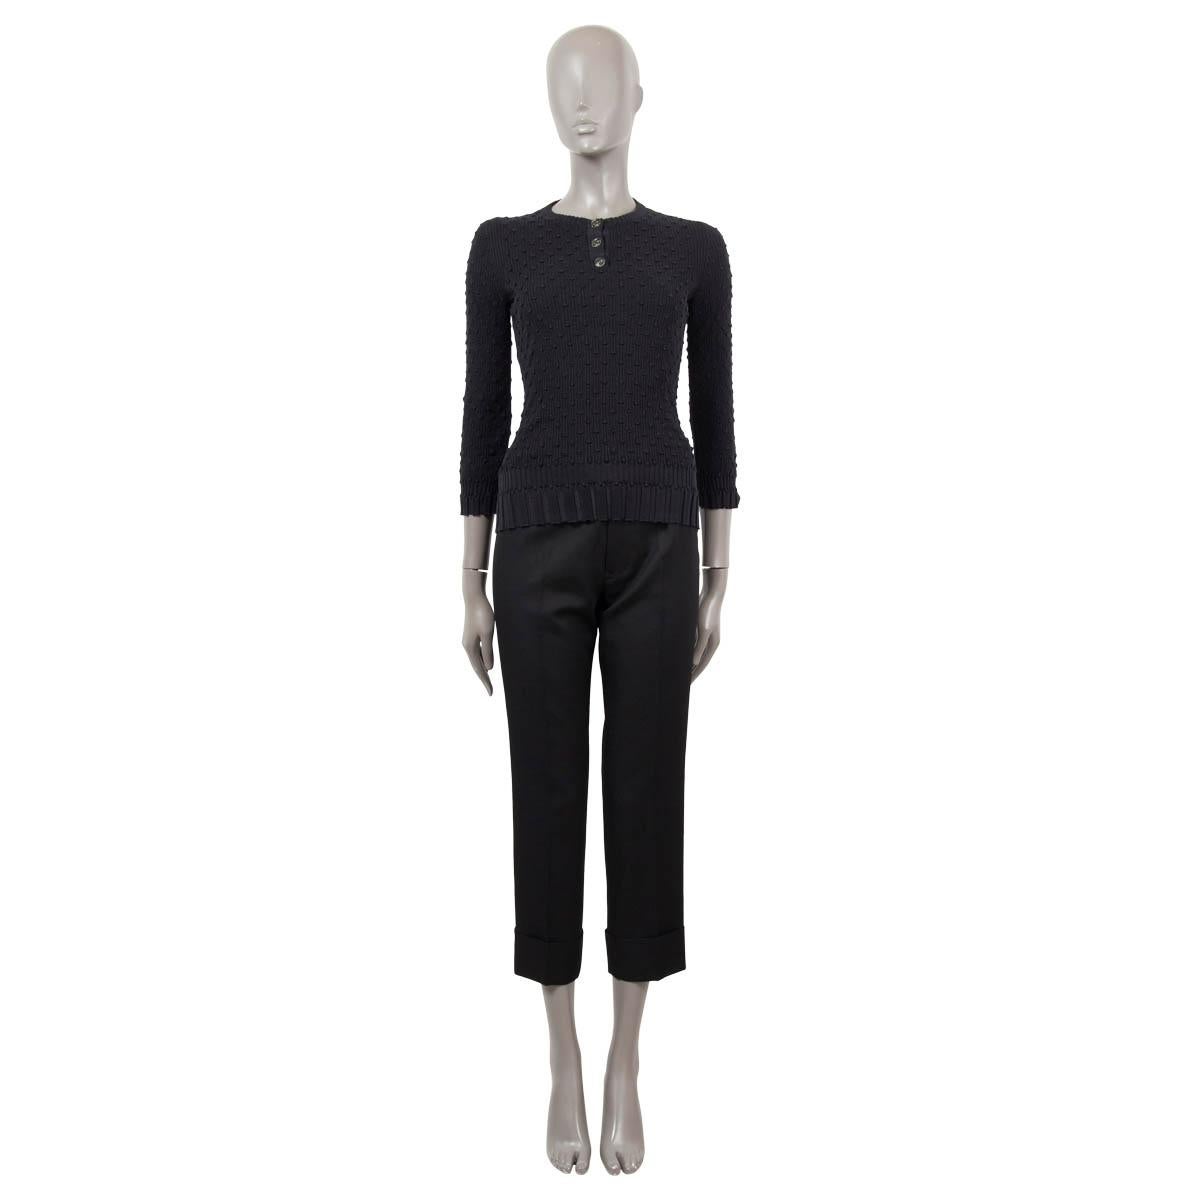 100% authentic Chanel 3/4 sleeve textured henley rib sweater in black cotton (70%) and silk (30%). The design features three celar CC embellished front buttons. Ribbed back. Has been worn and is in excellent condition. 

2018